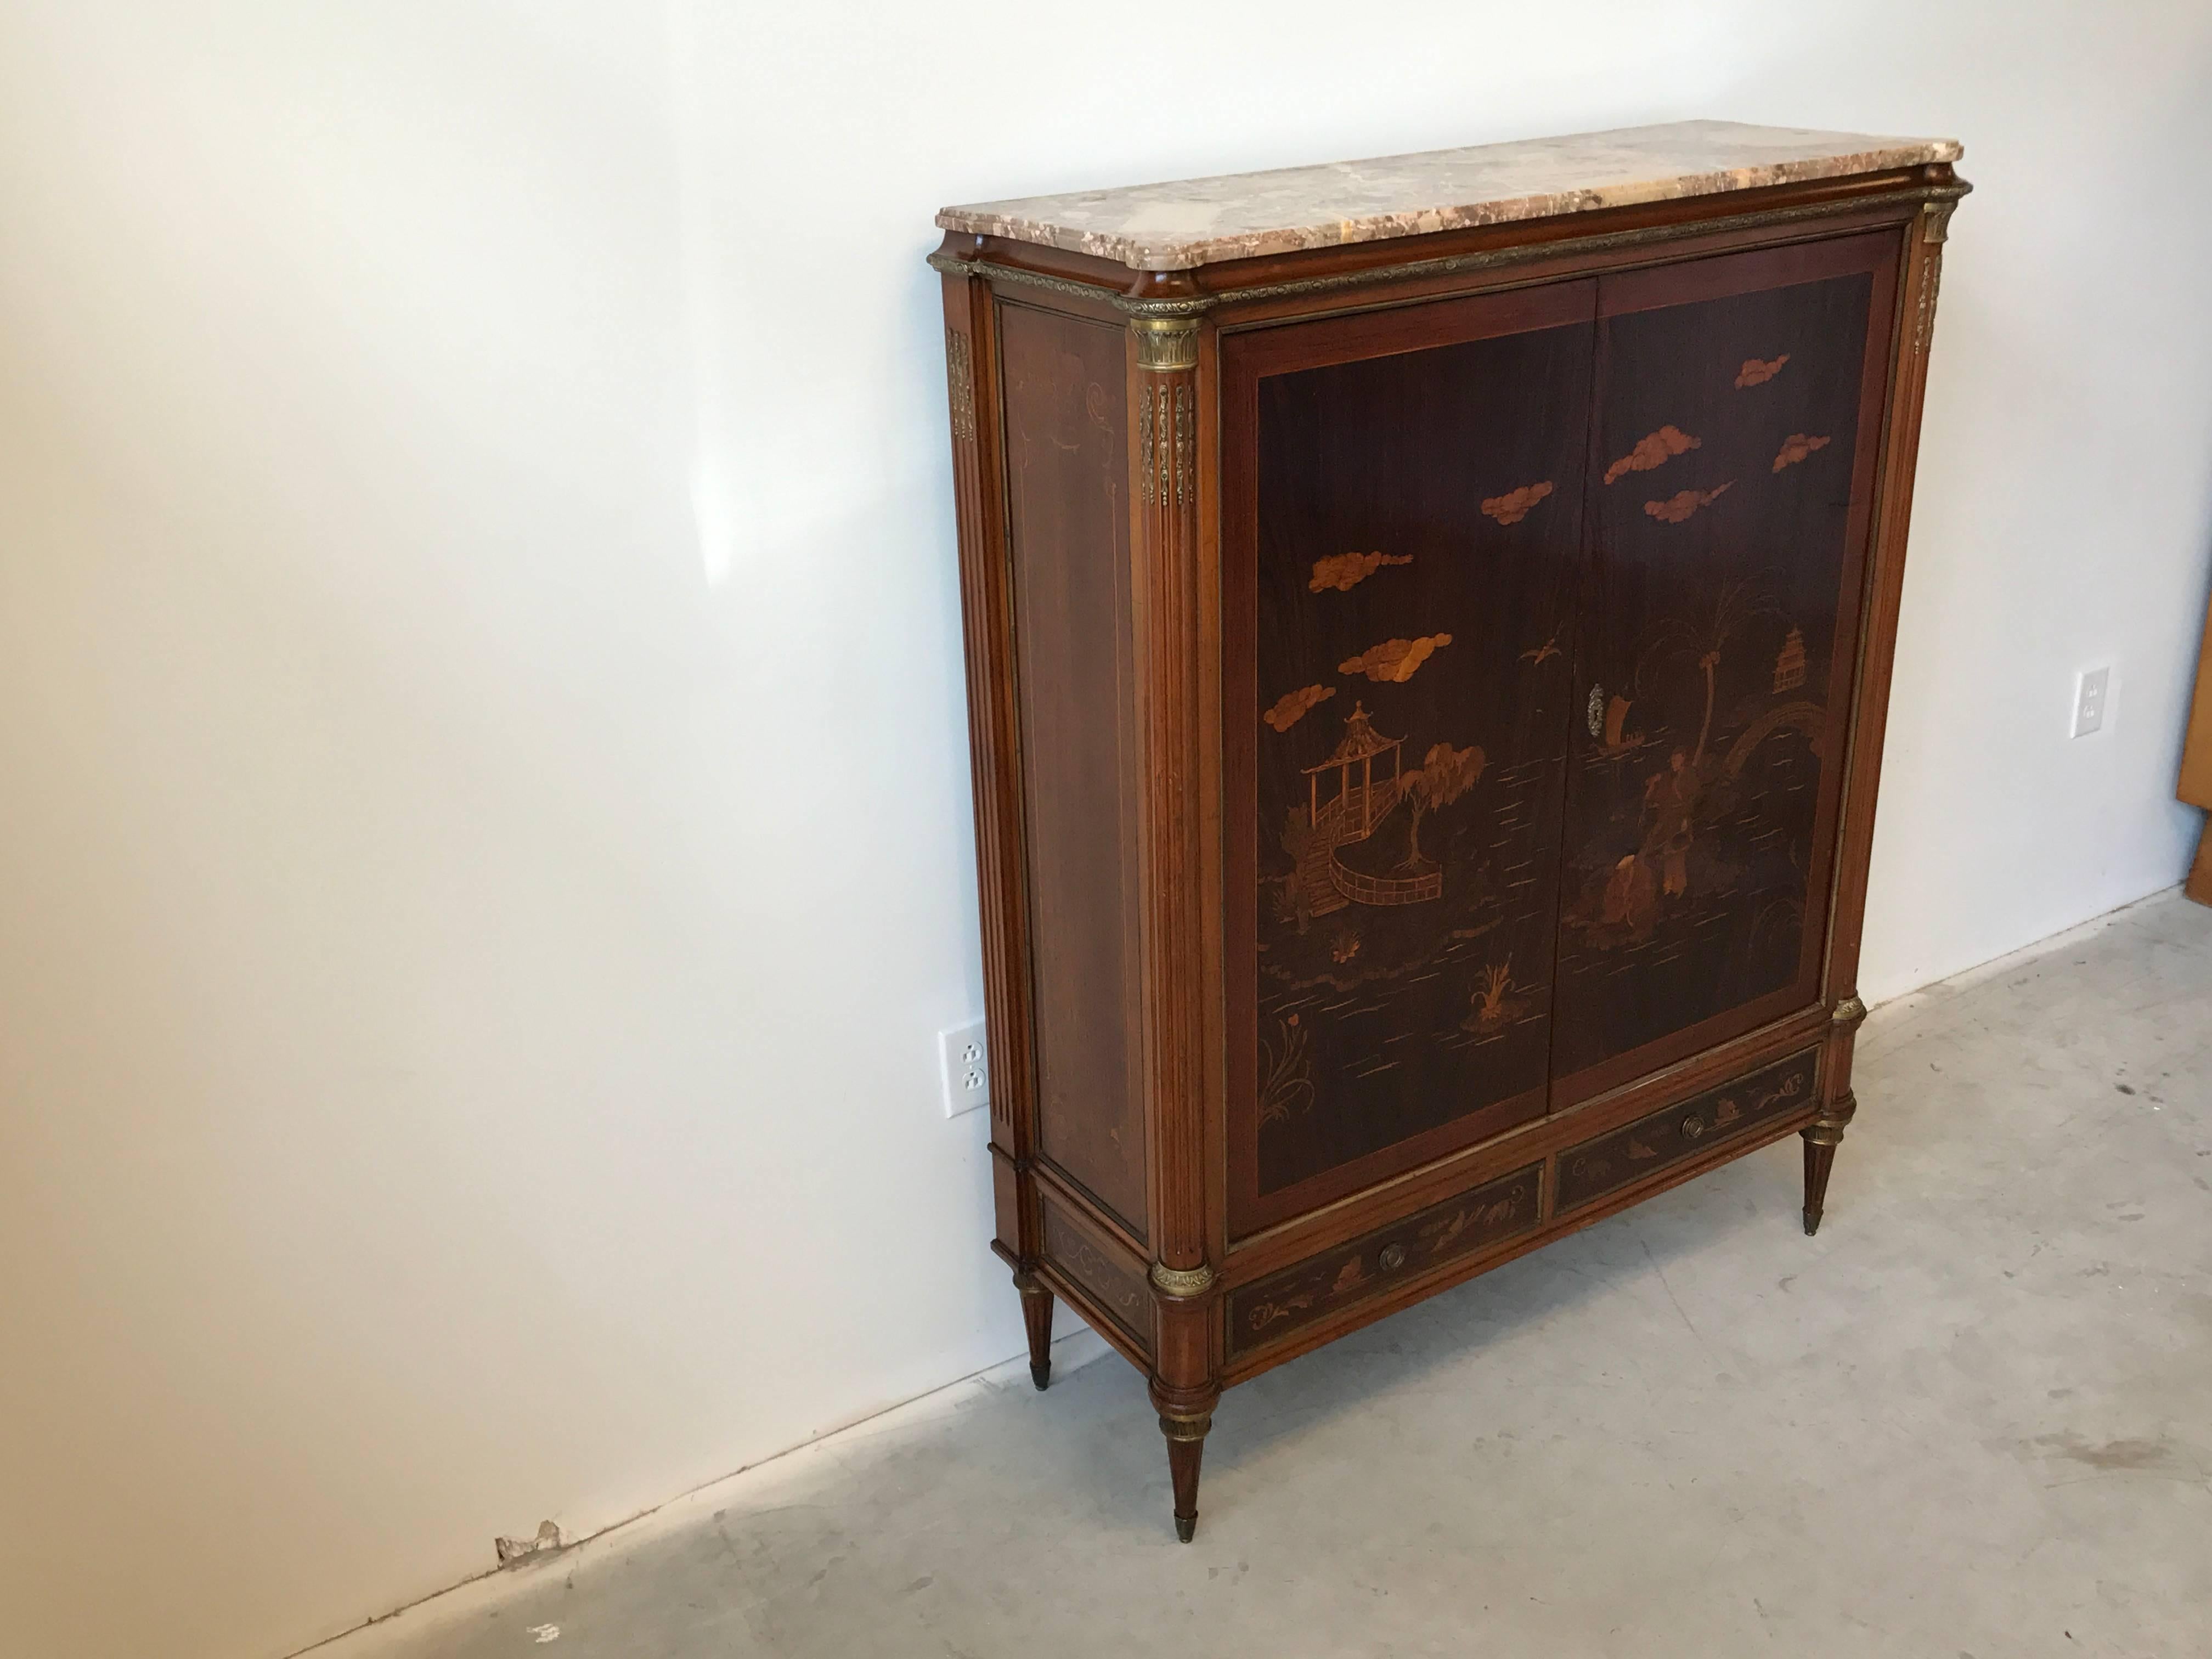 Offered is a stunning and extremely rare, 1940s Eugenio Diez walnut and mahogany chinoiserie dry bar cabinet with exotic wood inlay. The immaculate pieces exterior features intricate, ornate marquetry inlay, fluted sides extending to the legs,